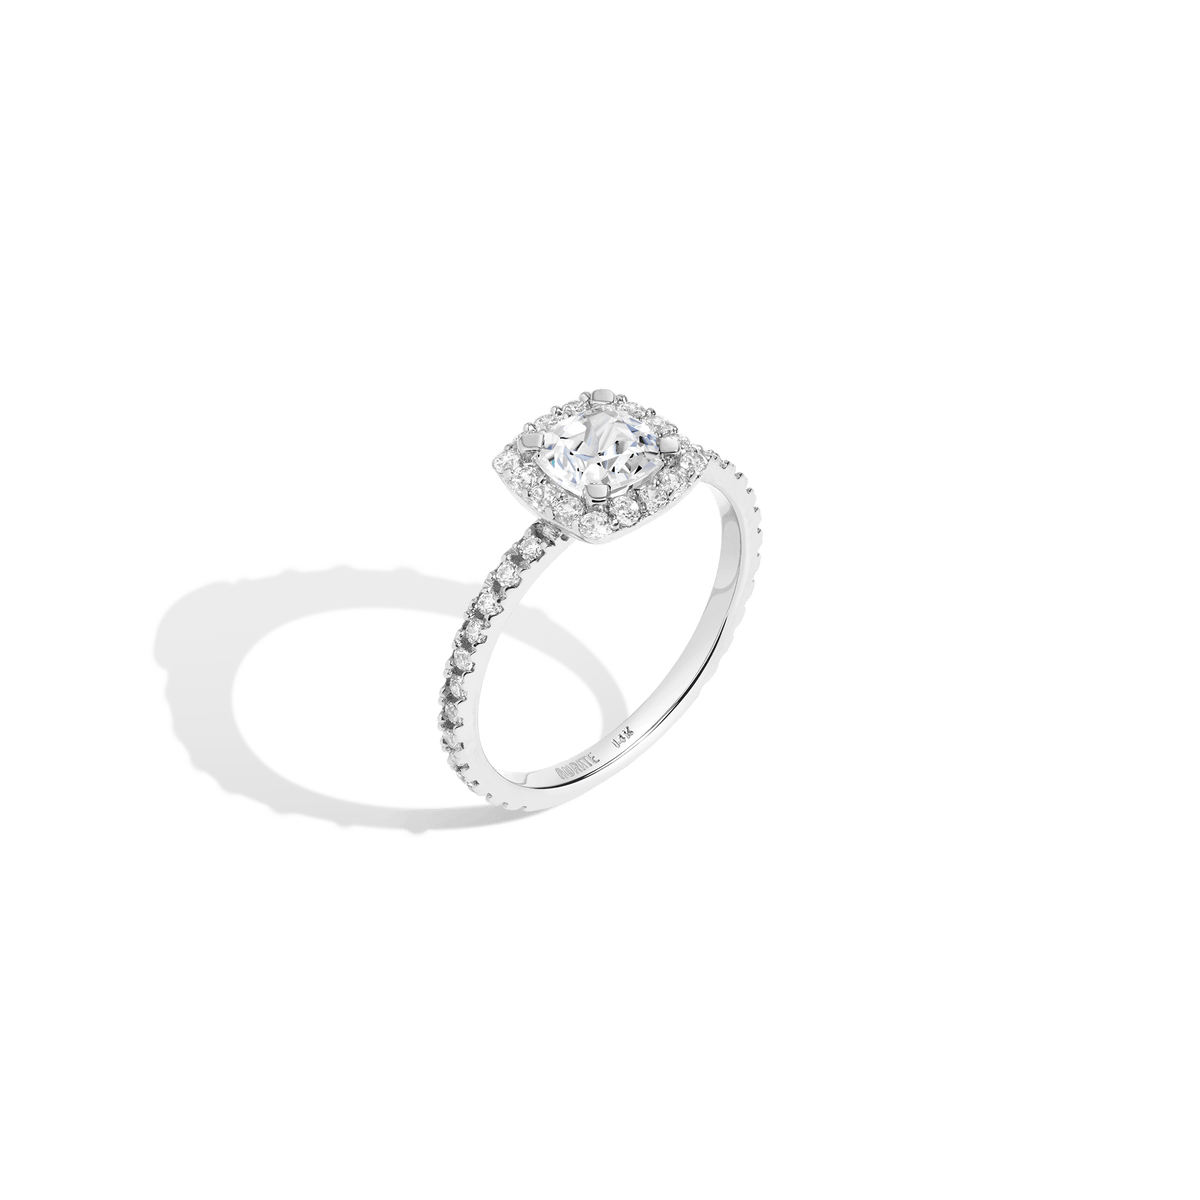 Why You Shouldn't Choose a White Gold Engagement Ring